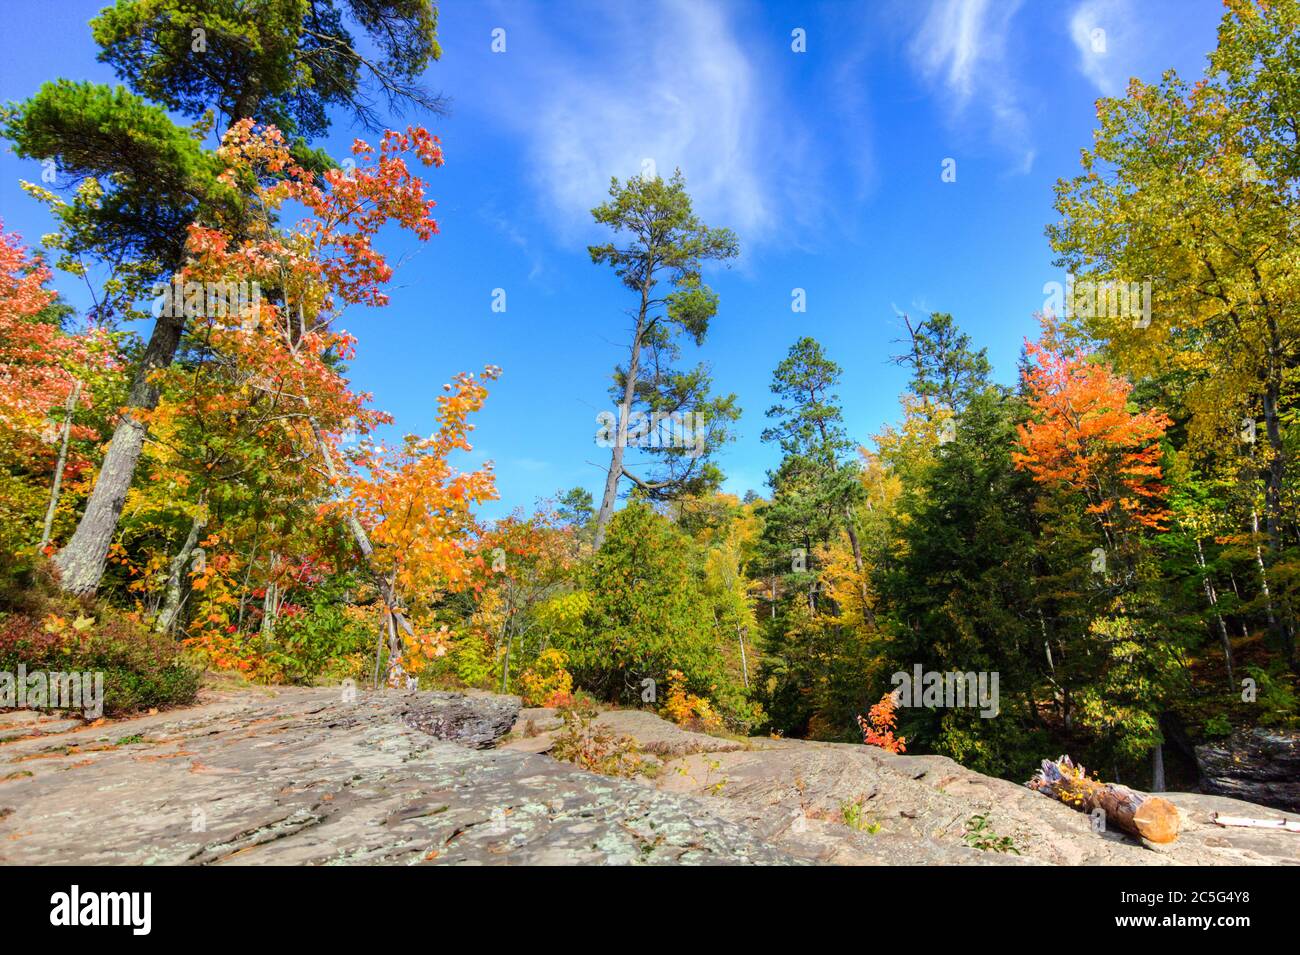 Autumn forest landscape at Porcupine Mountains Wilderness State Park in the Upper Peninsula of Michigan during peak fall colors. Stock Photo